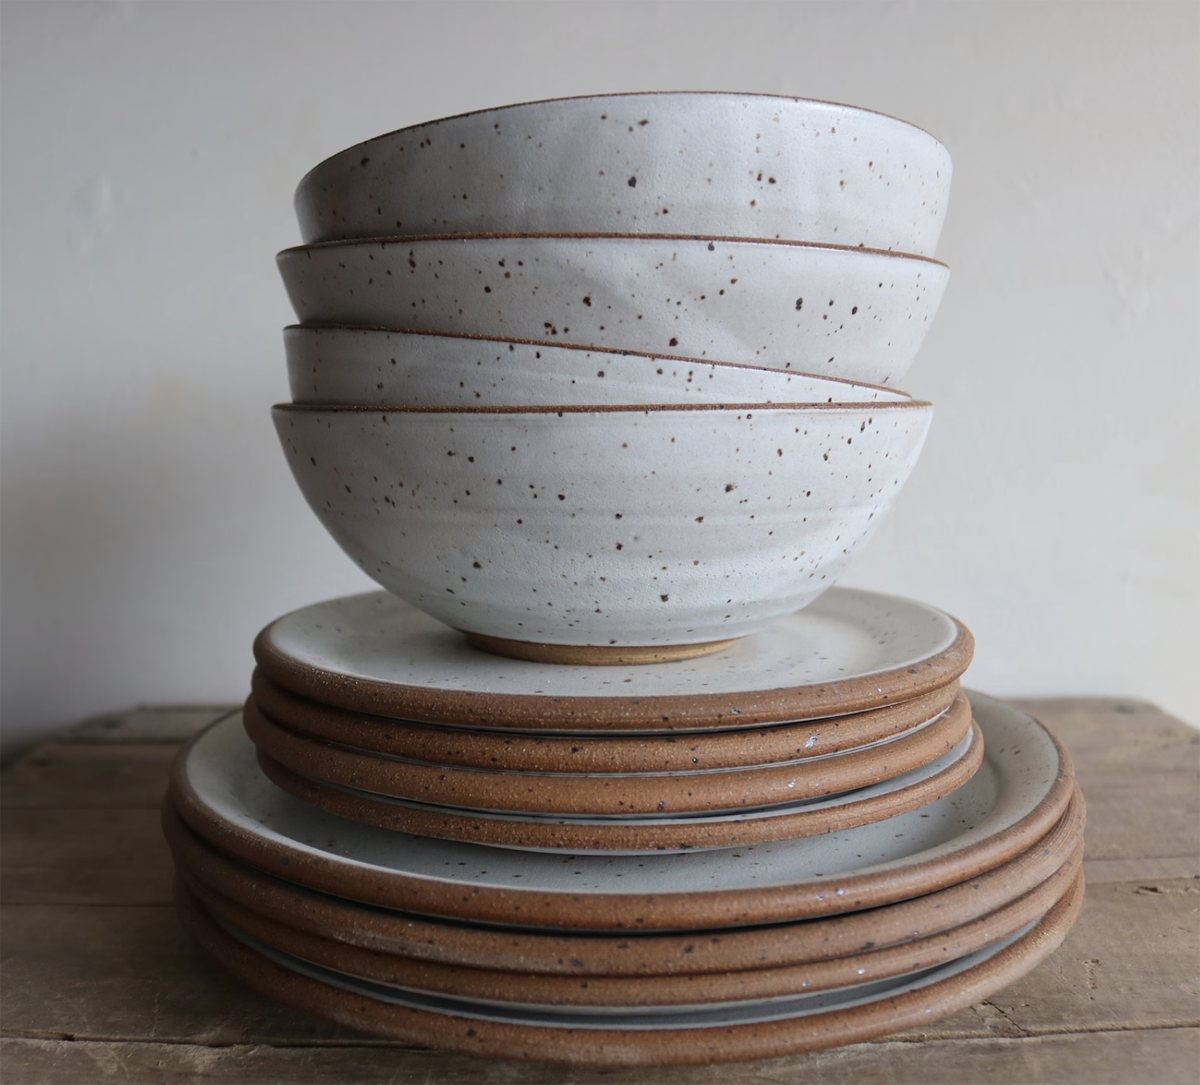 Stack of white speckled bowls and plates